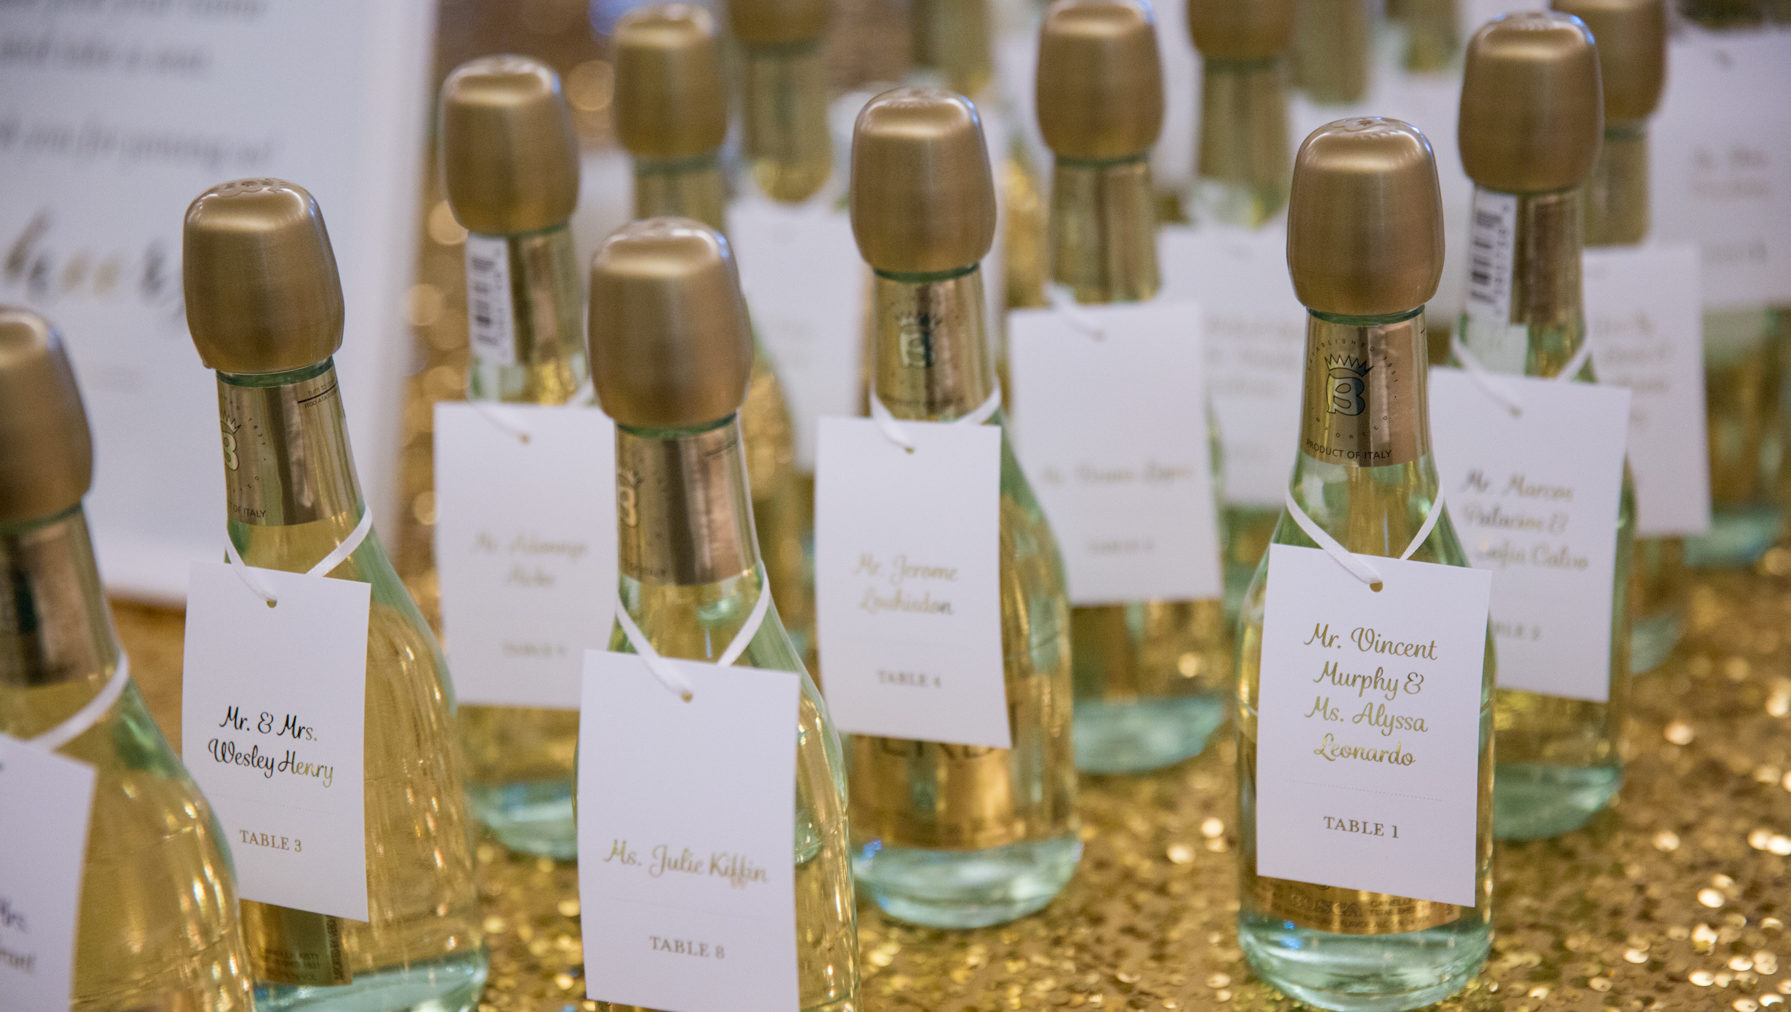 The mini champagne bottles had tags with the guest names and table assignment